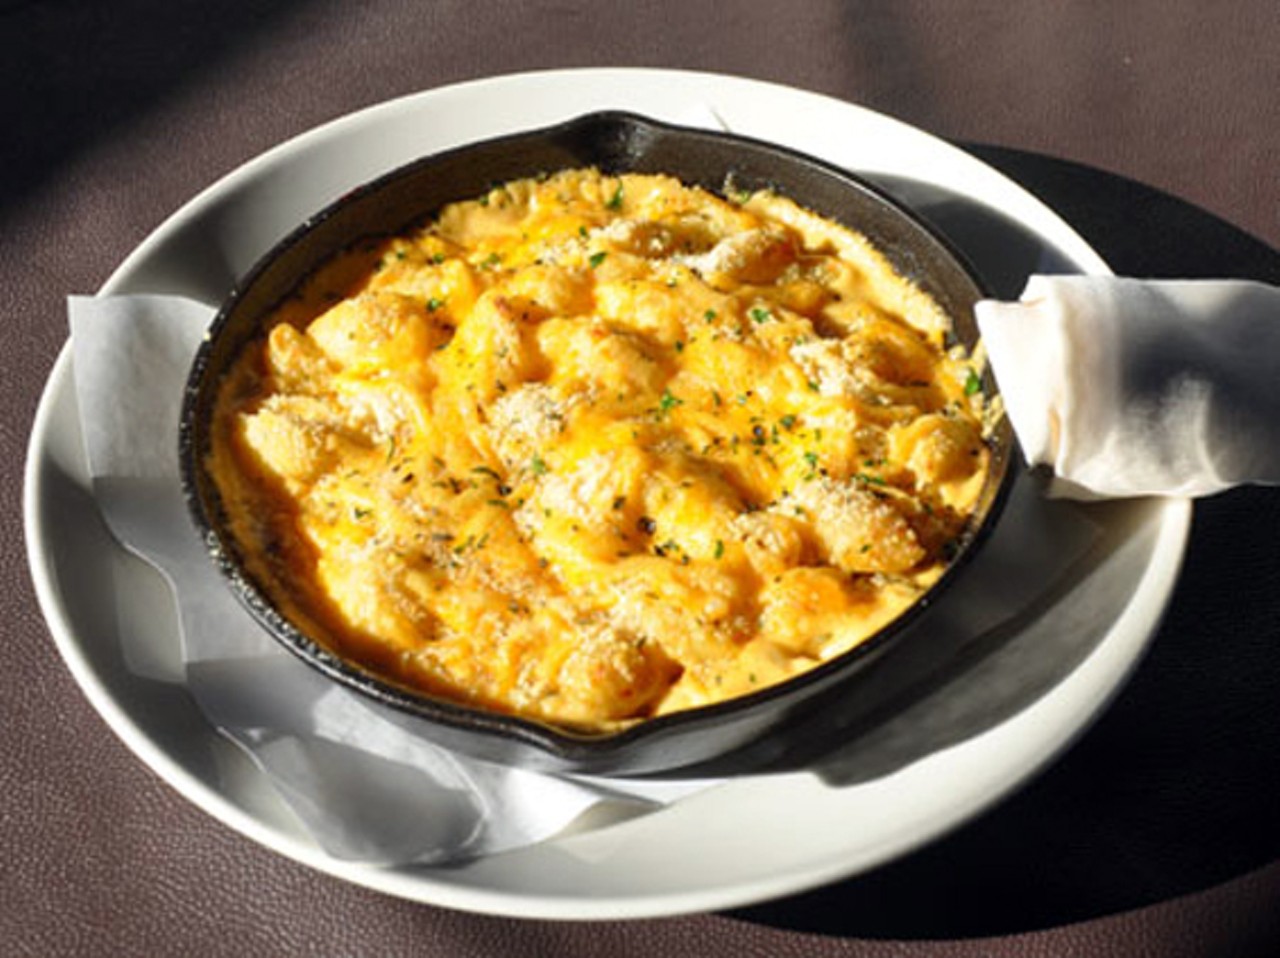 3. The Block's baked mac & cheese ($10.50) 
Pure, unadulterated, cheesy ridiculousness served in a skillet. Original post.